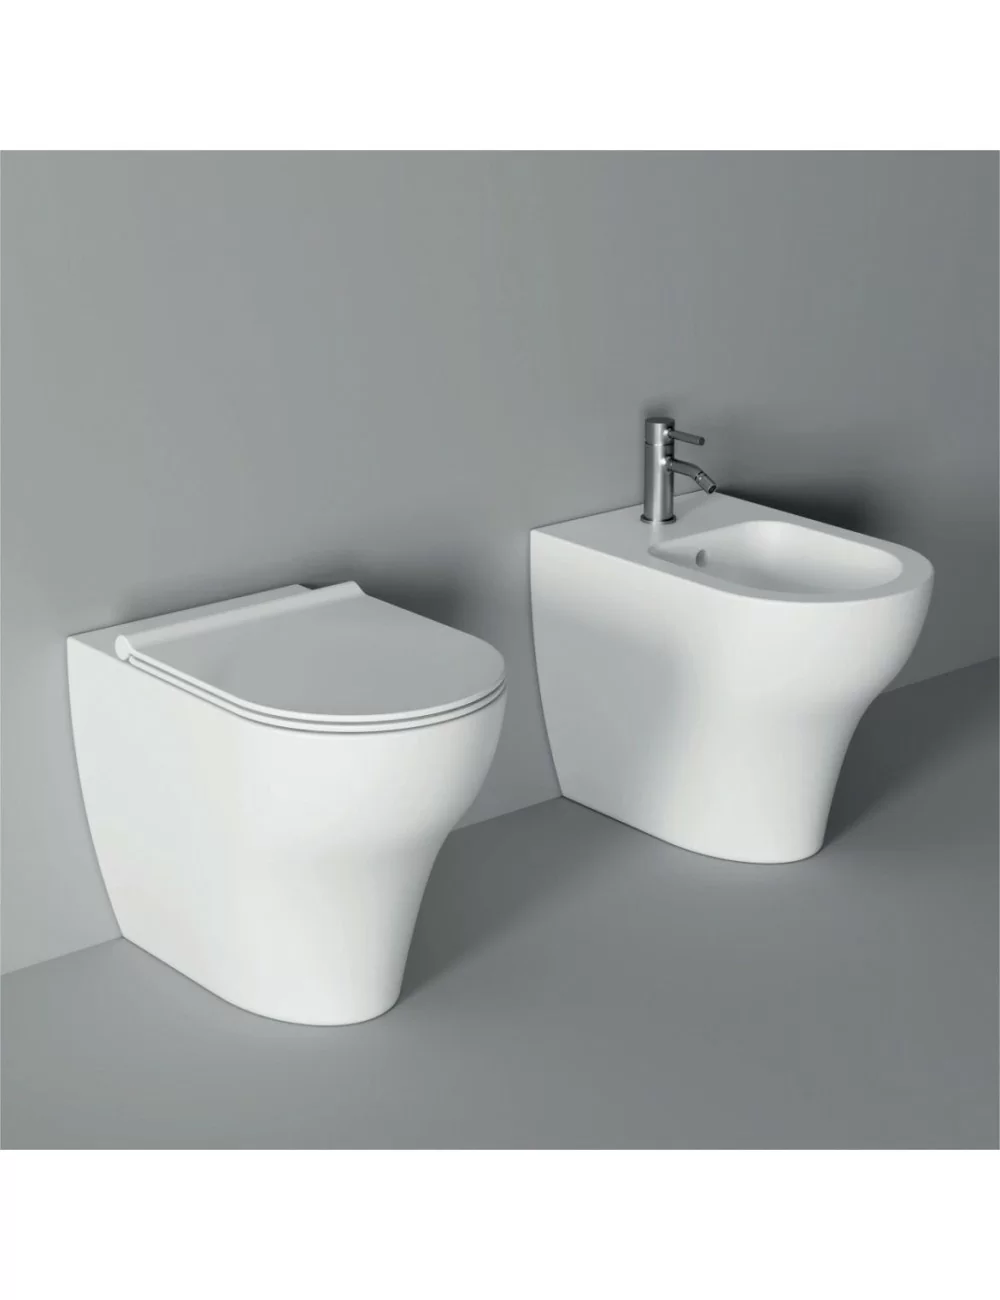 white floor-standing bathroom fittings Unica by Alice Ceramica